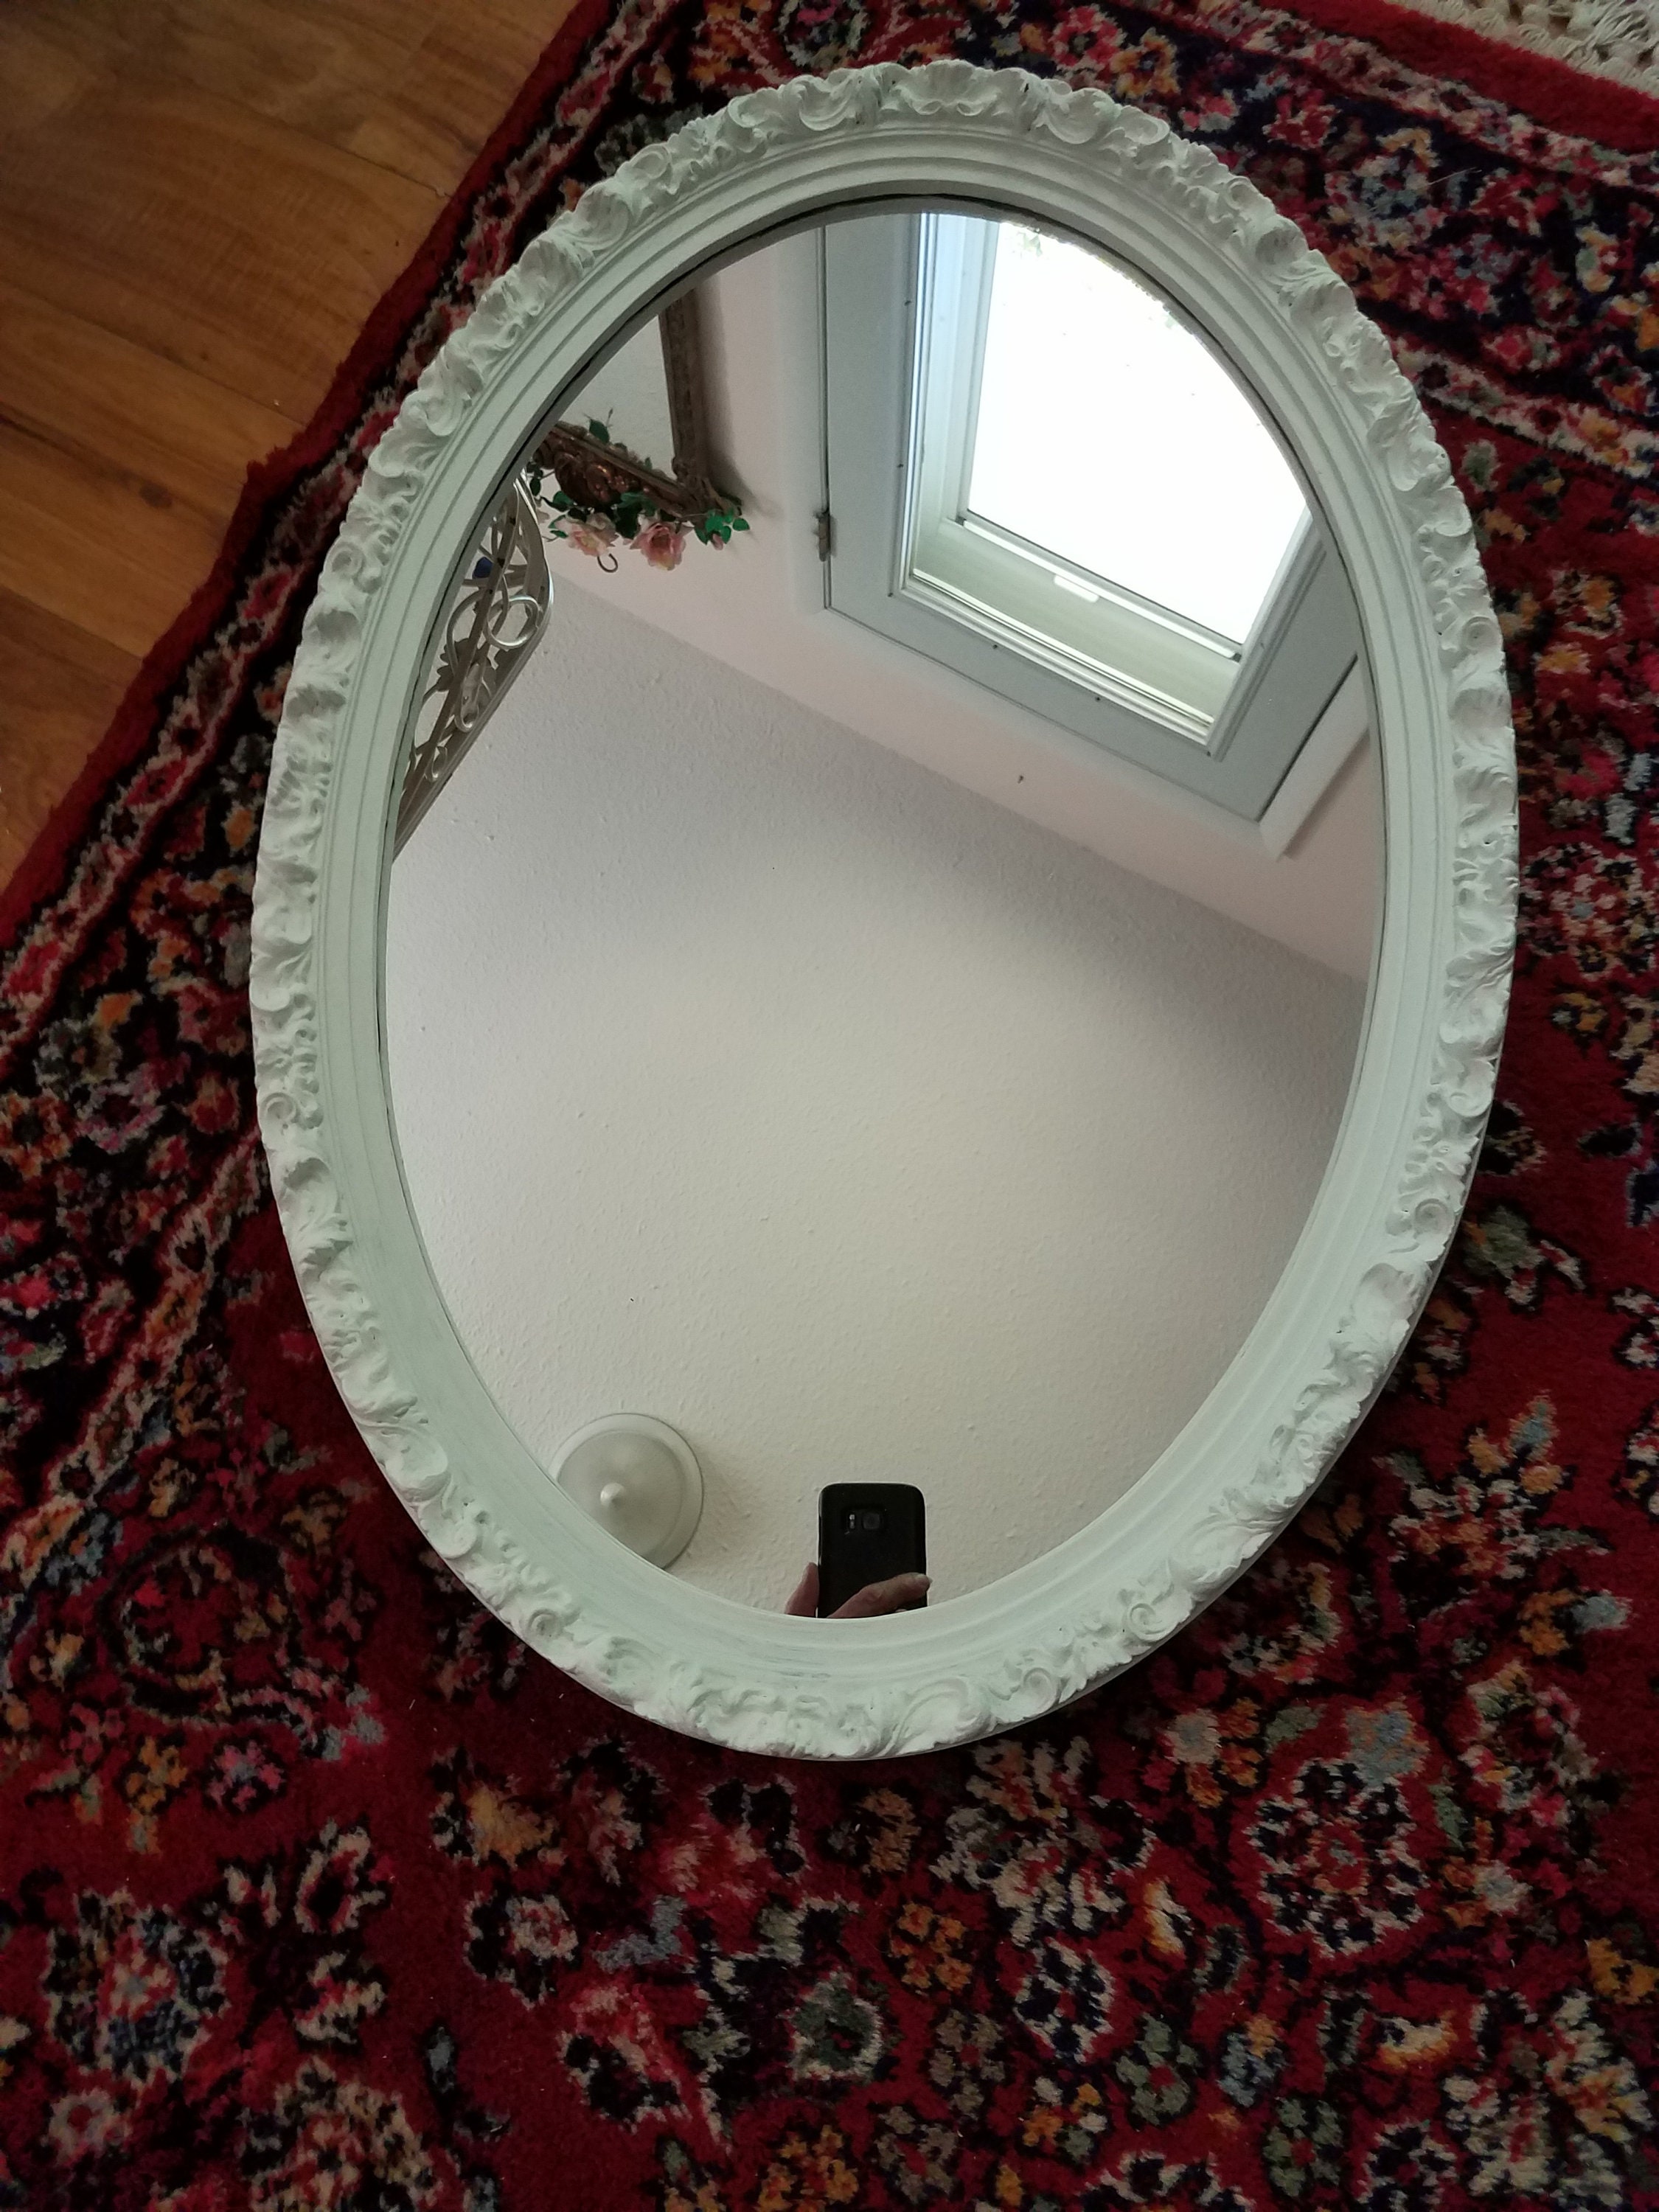 Oval mirror with brown frame, Magic Mirror Queen Mirror, Mirror, furniture,  mirror, picture Frames png